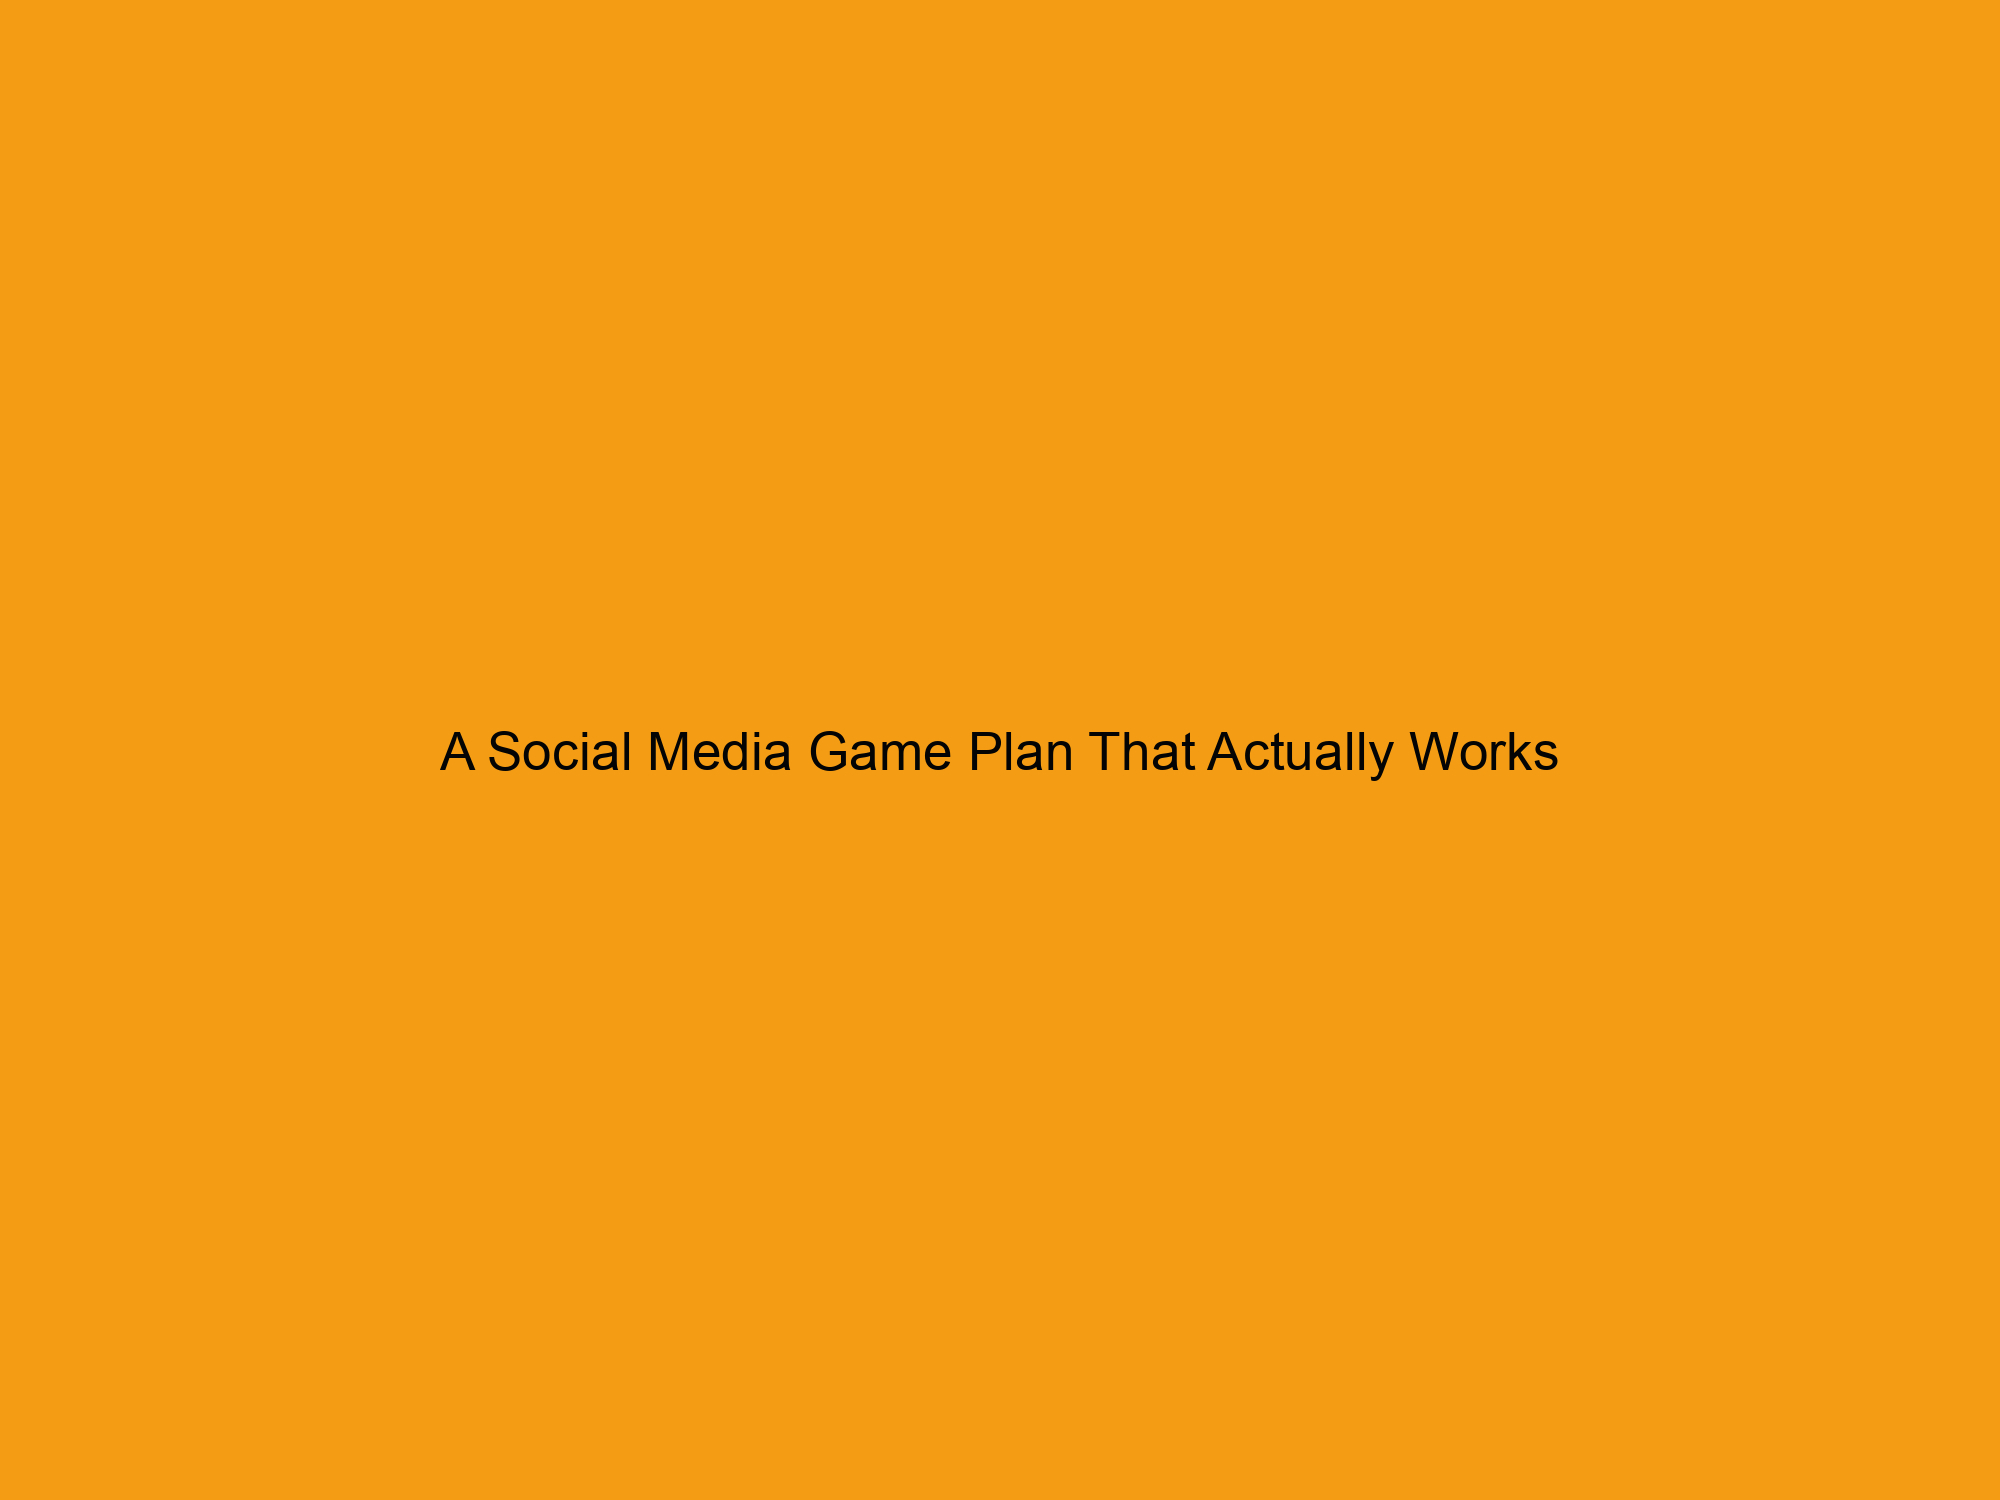 A Social Media Game Plan That Actually Works